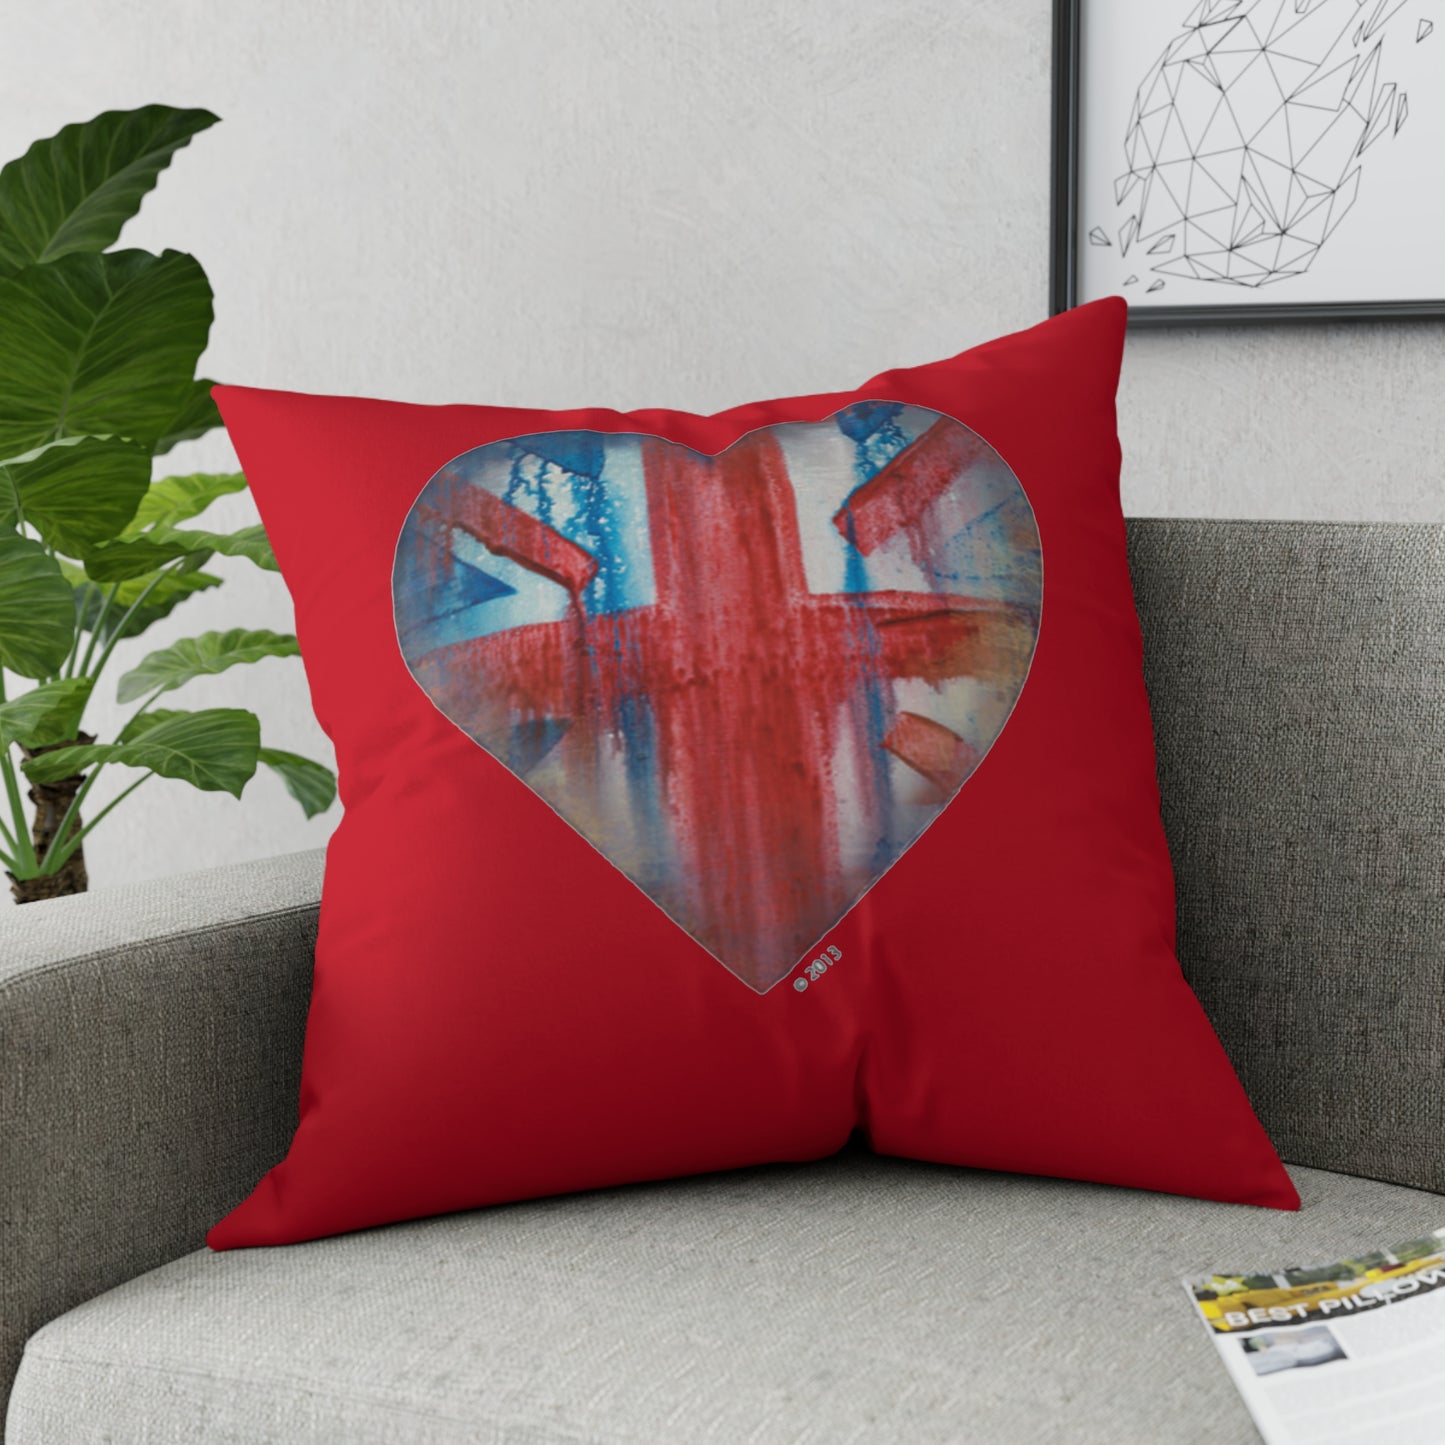 Red Throw Pillow -Colorful Throw pillow for couch - Union Jack decorative pillow for bed - Heart throw Pillow